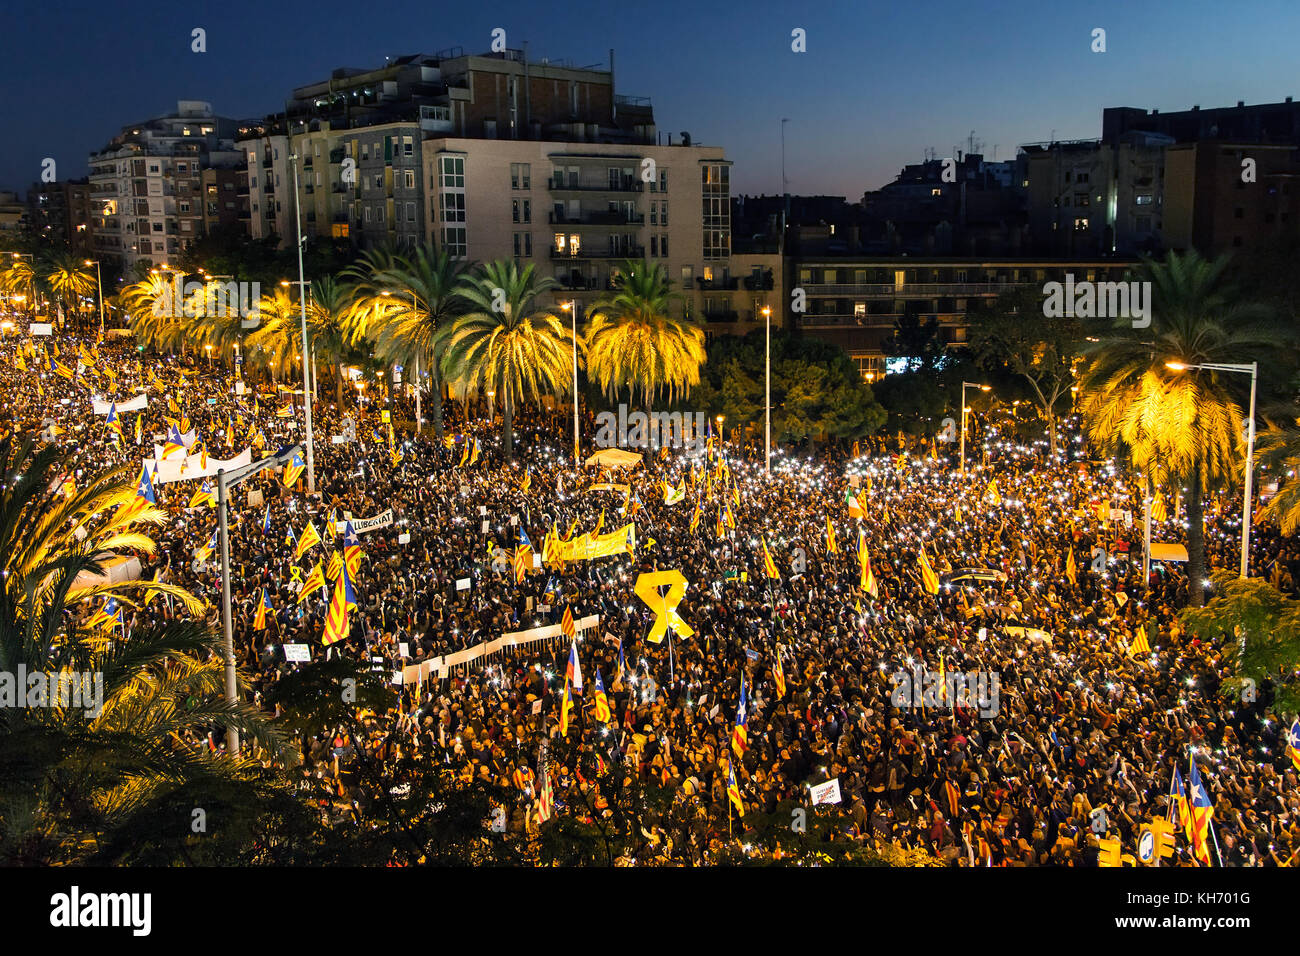 Catalonia independence supporters marching on a demonstration against the spanish central government at night in Barcelona, Spain. Stock Photo